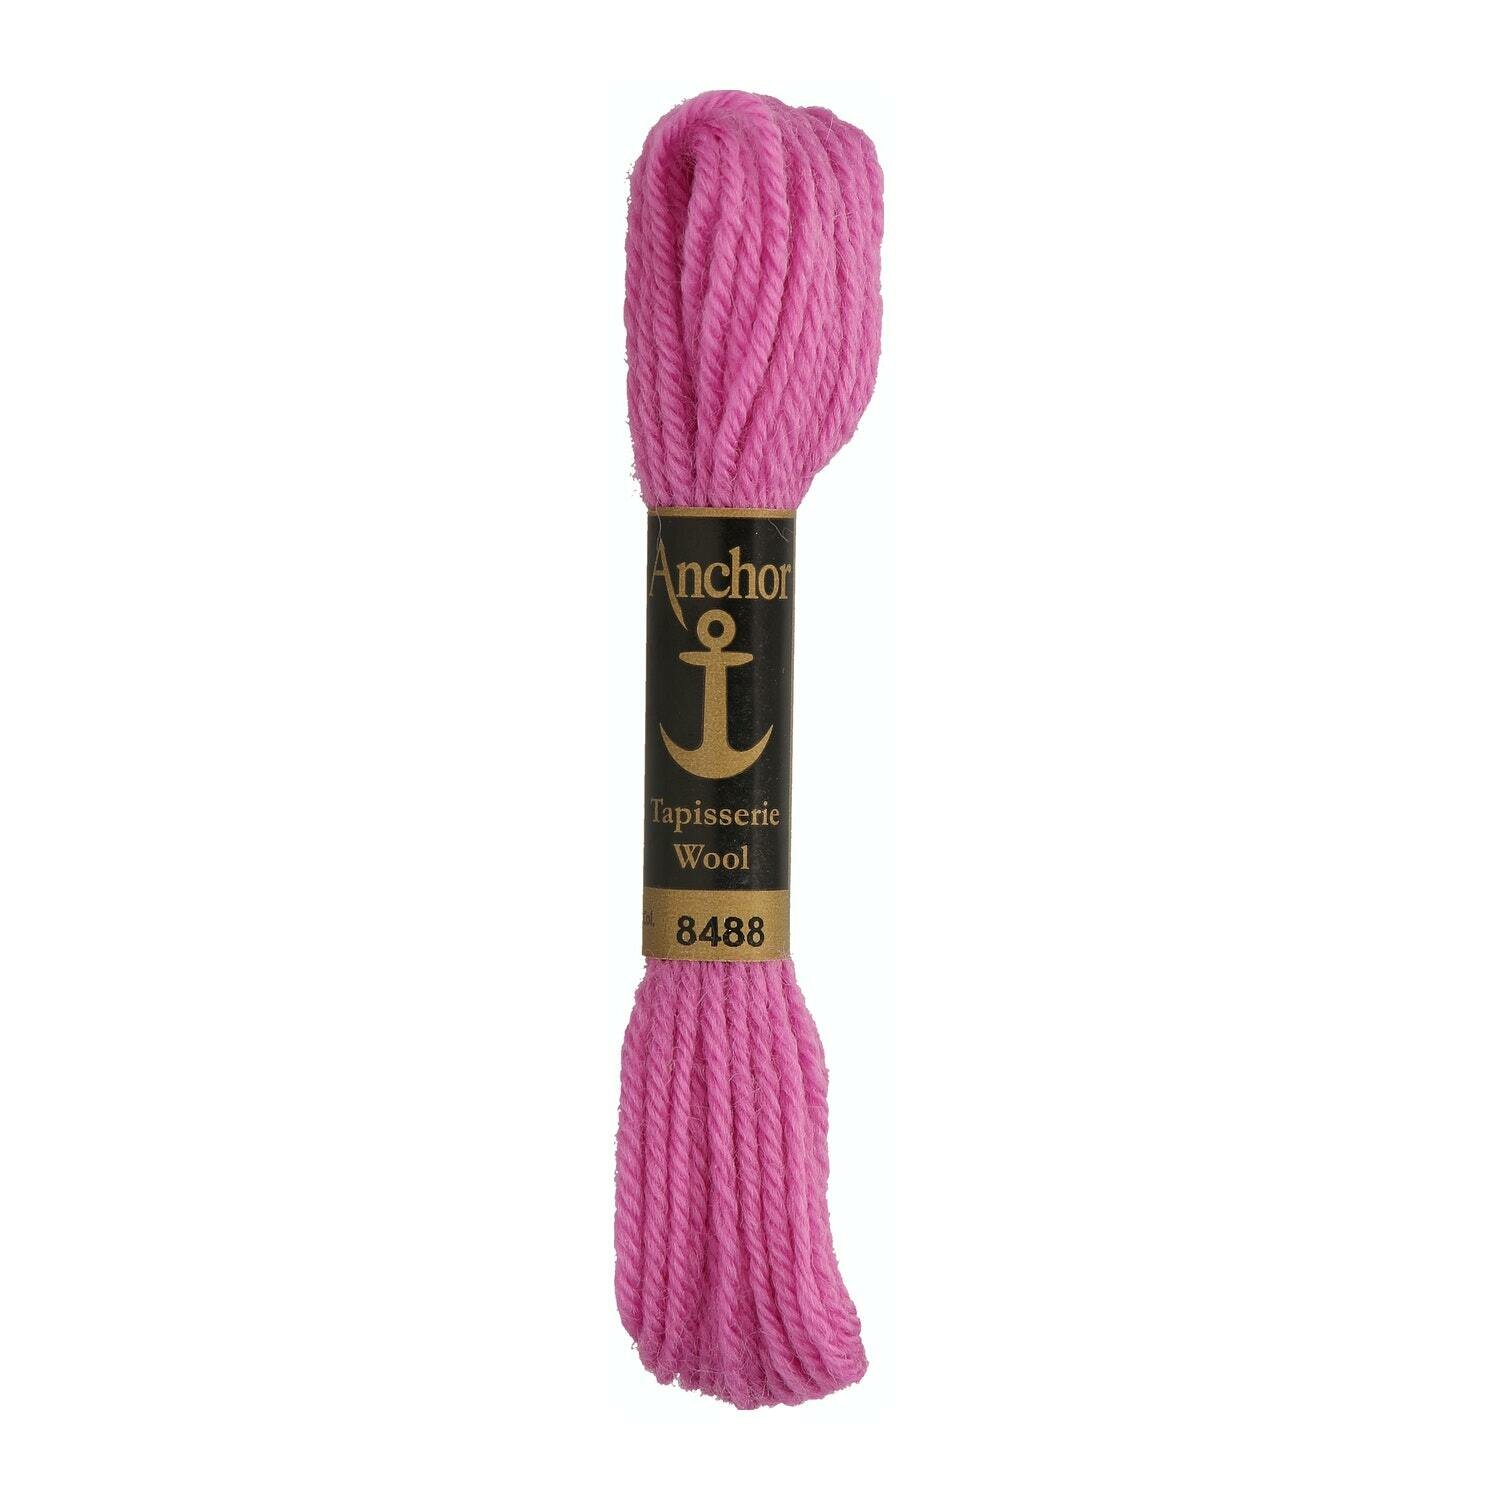 Anchor Tapisserie Wool # 08488